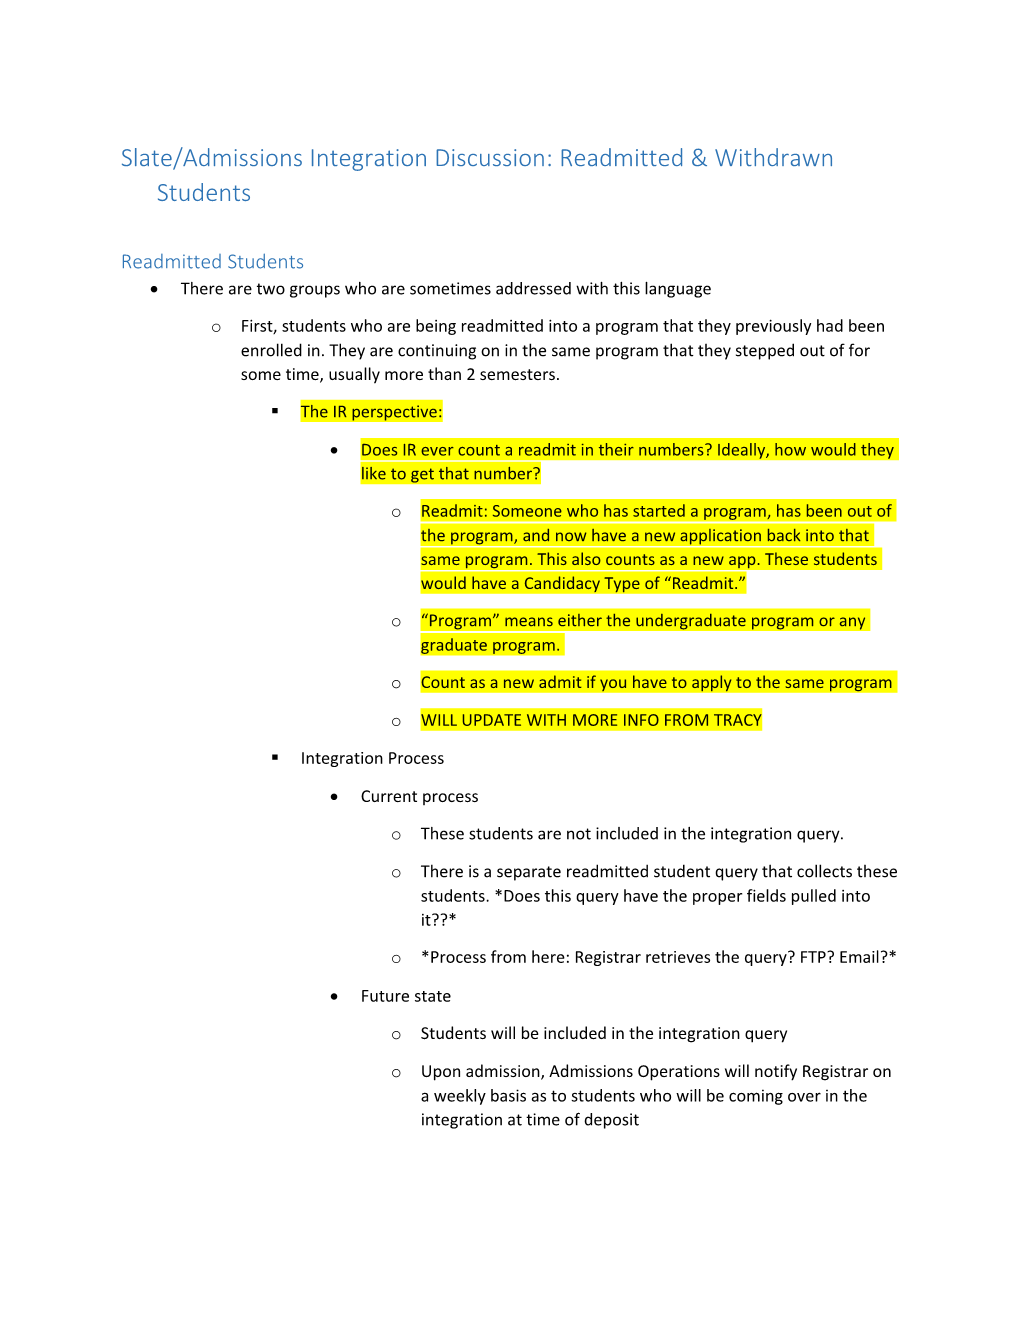 Slate/Admissions Integration Discussion: Readmitted & Withdrawn Students